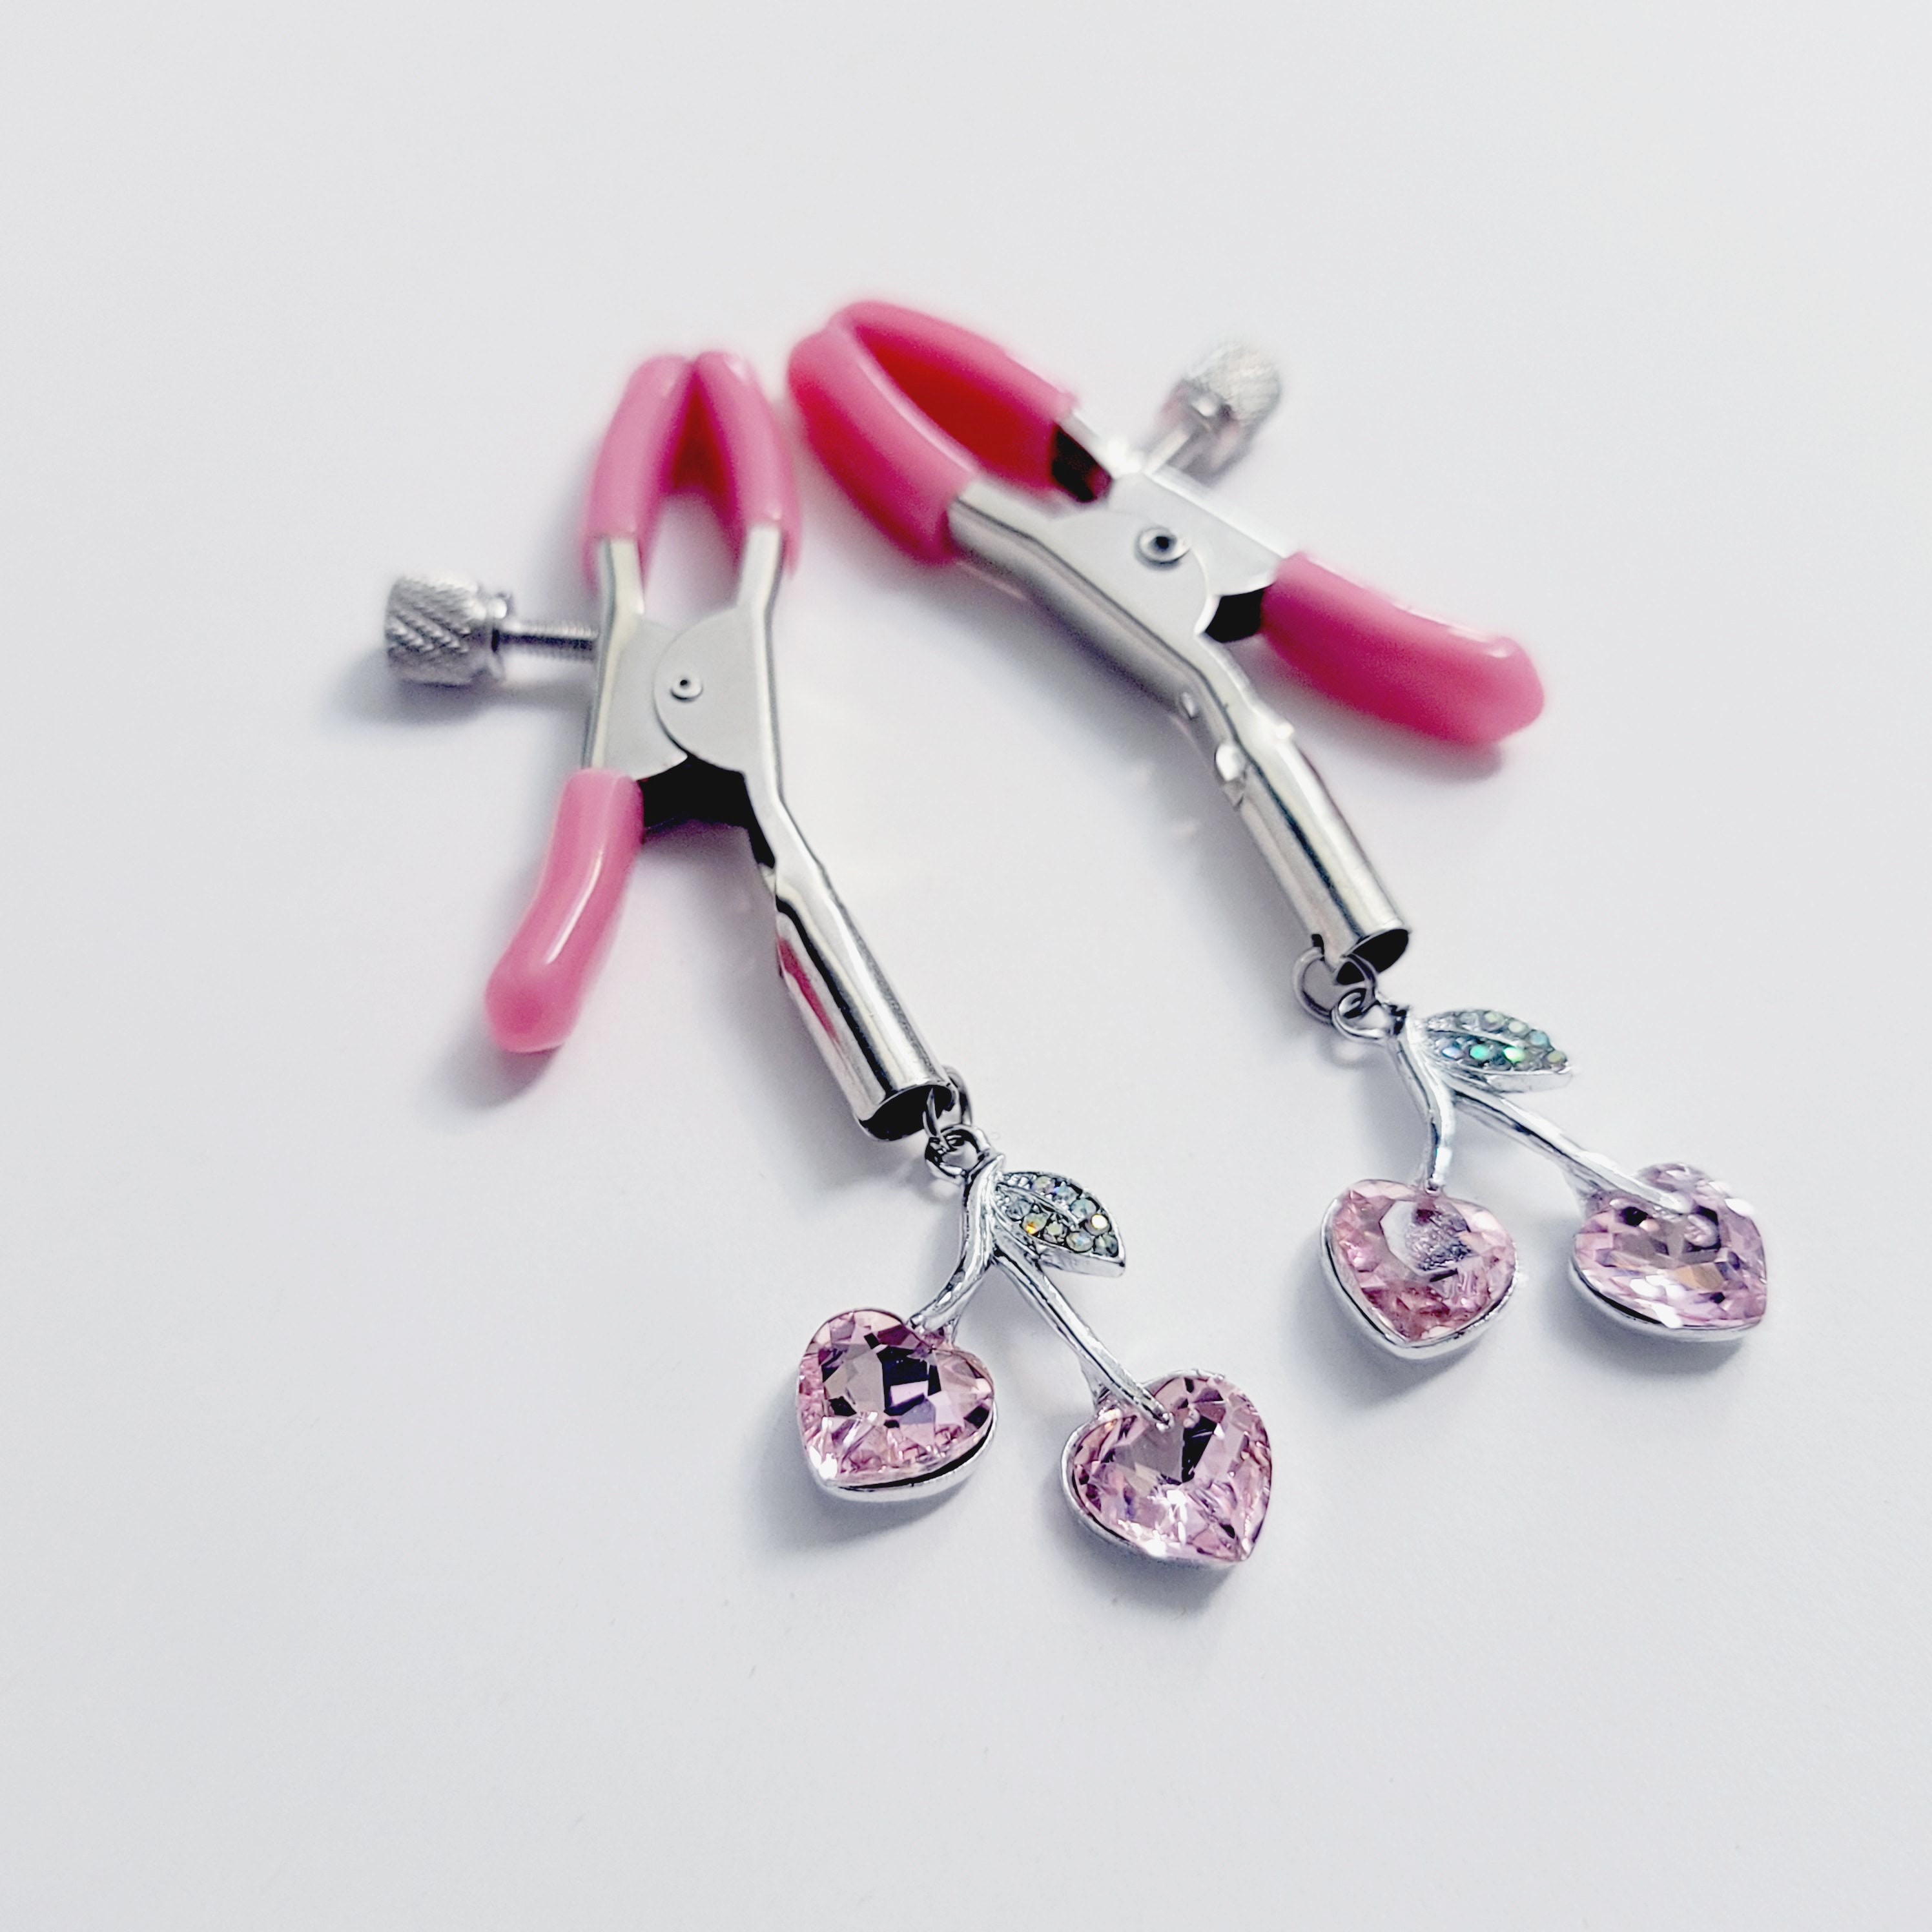 Pink Adjustable Nipple Clamps with Gemstone Heart Cherry Pendants. MATURE, DDLG, BDSM photo